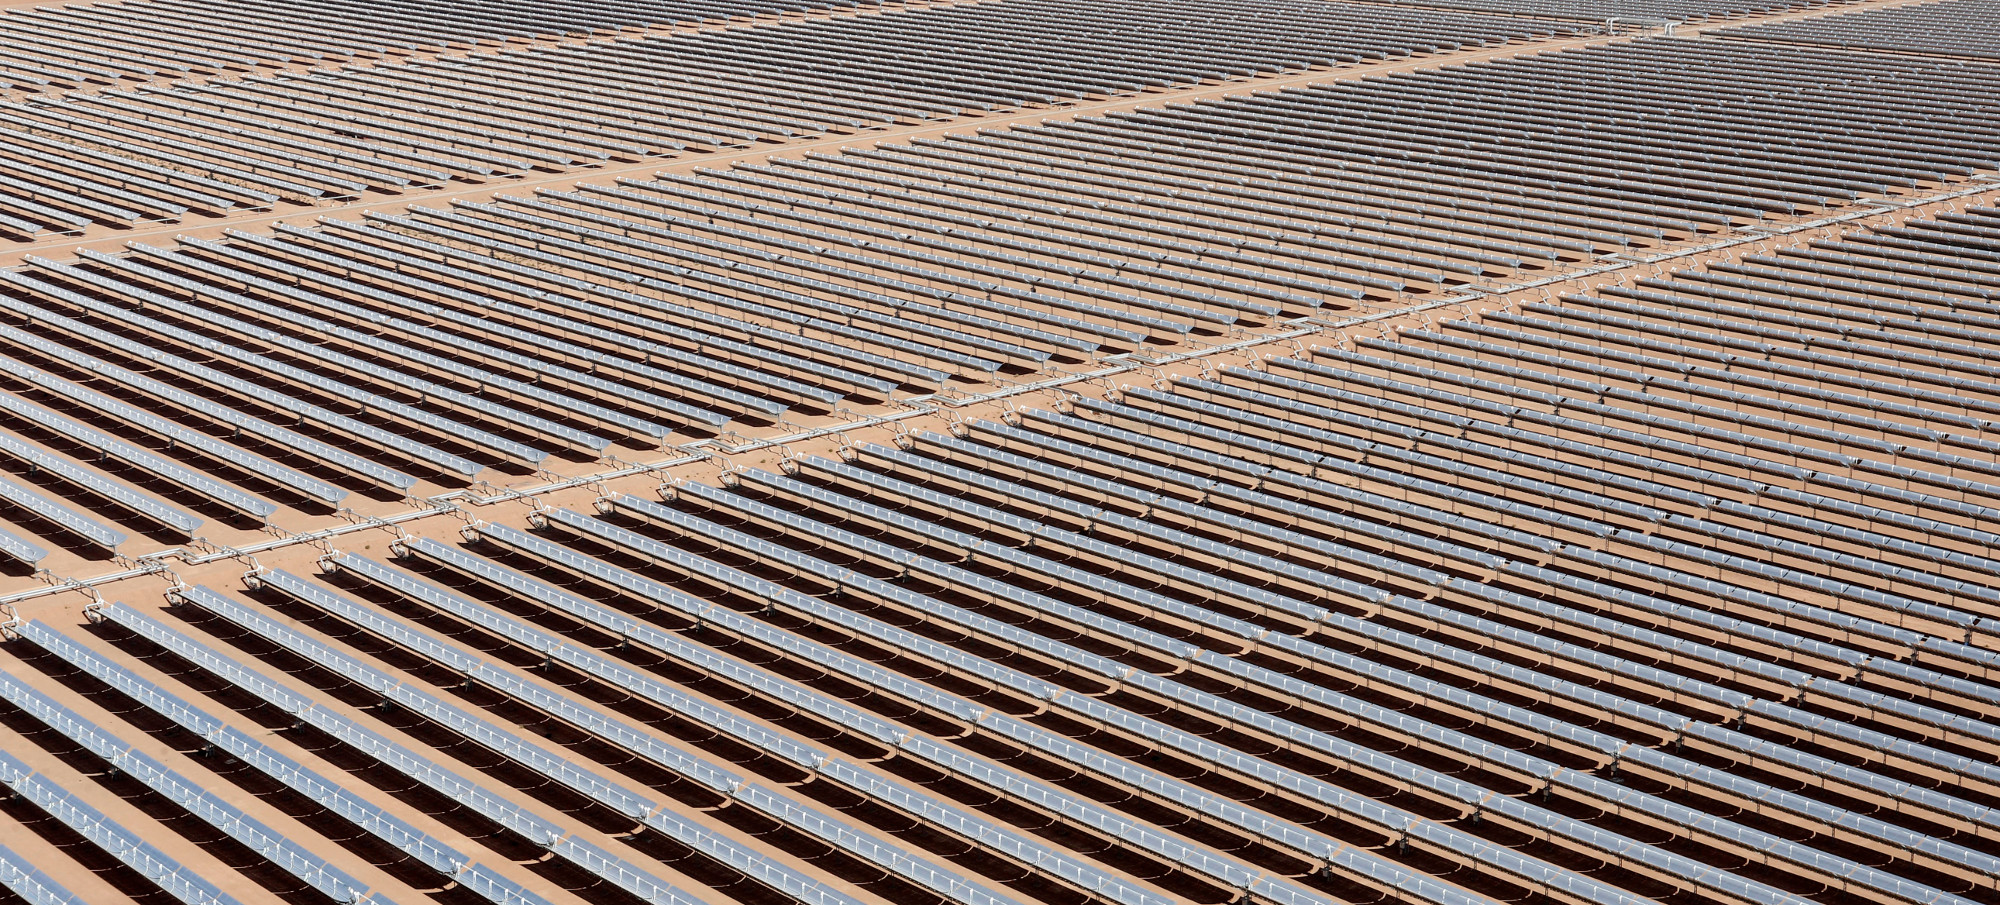 Morocco Switches On First Phase Of The World’s Largest Solar Plant